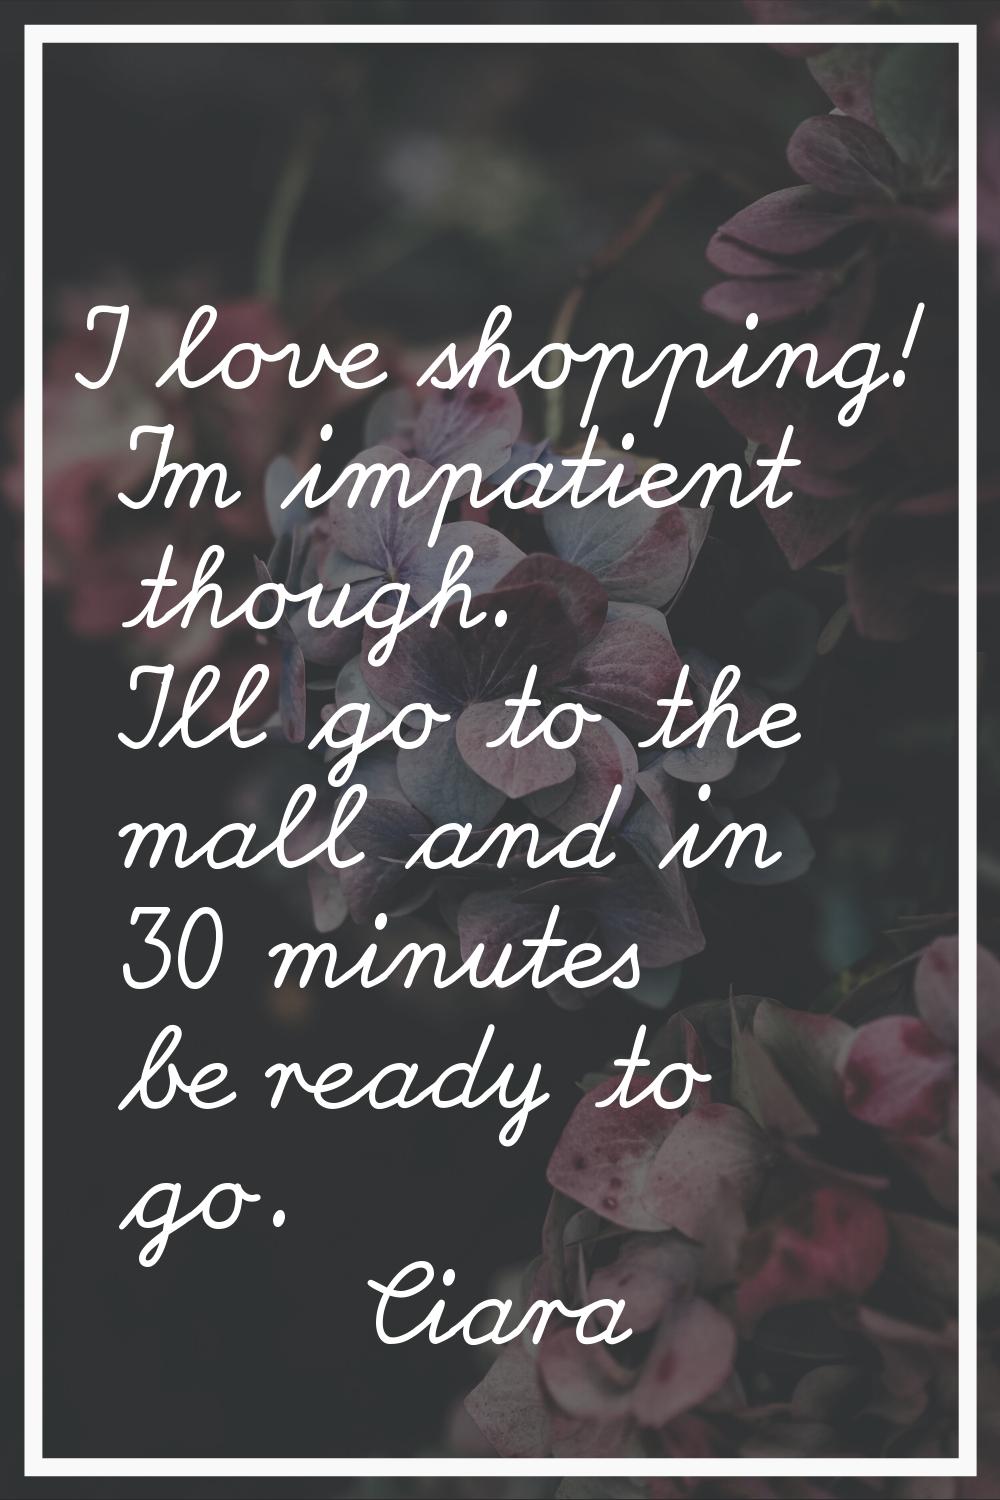 I love shopping! I'm impatient though. I'll go to the mall and in 30 minutes be ready to go.